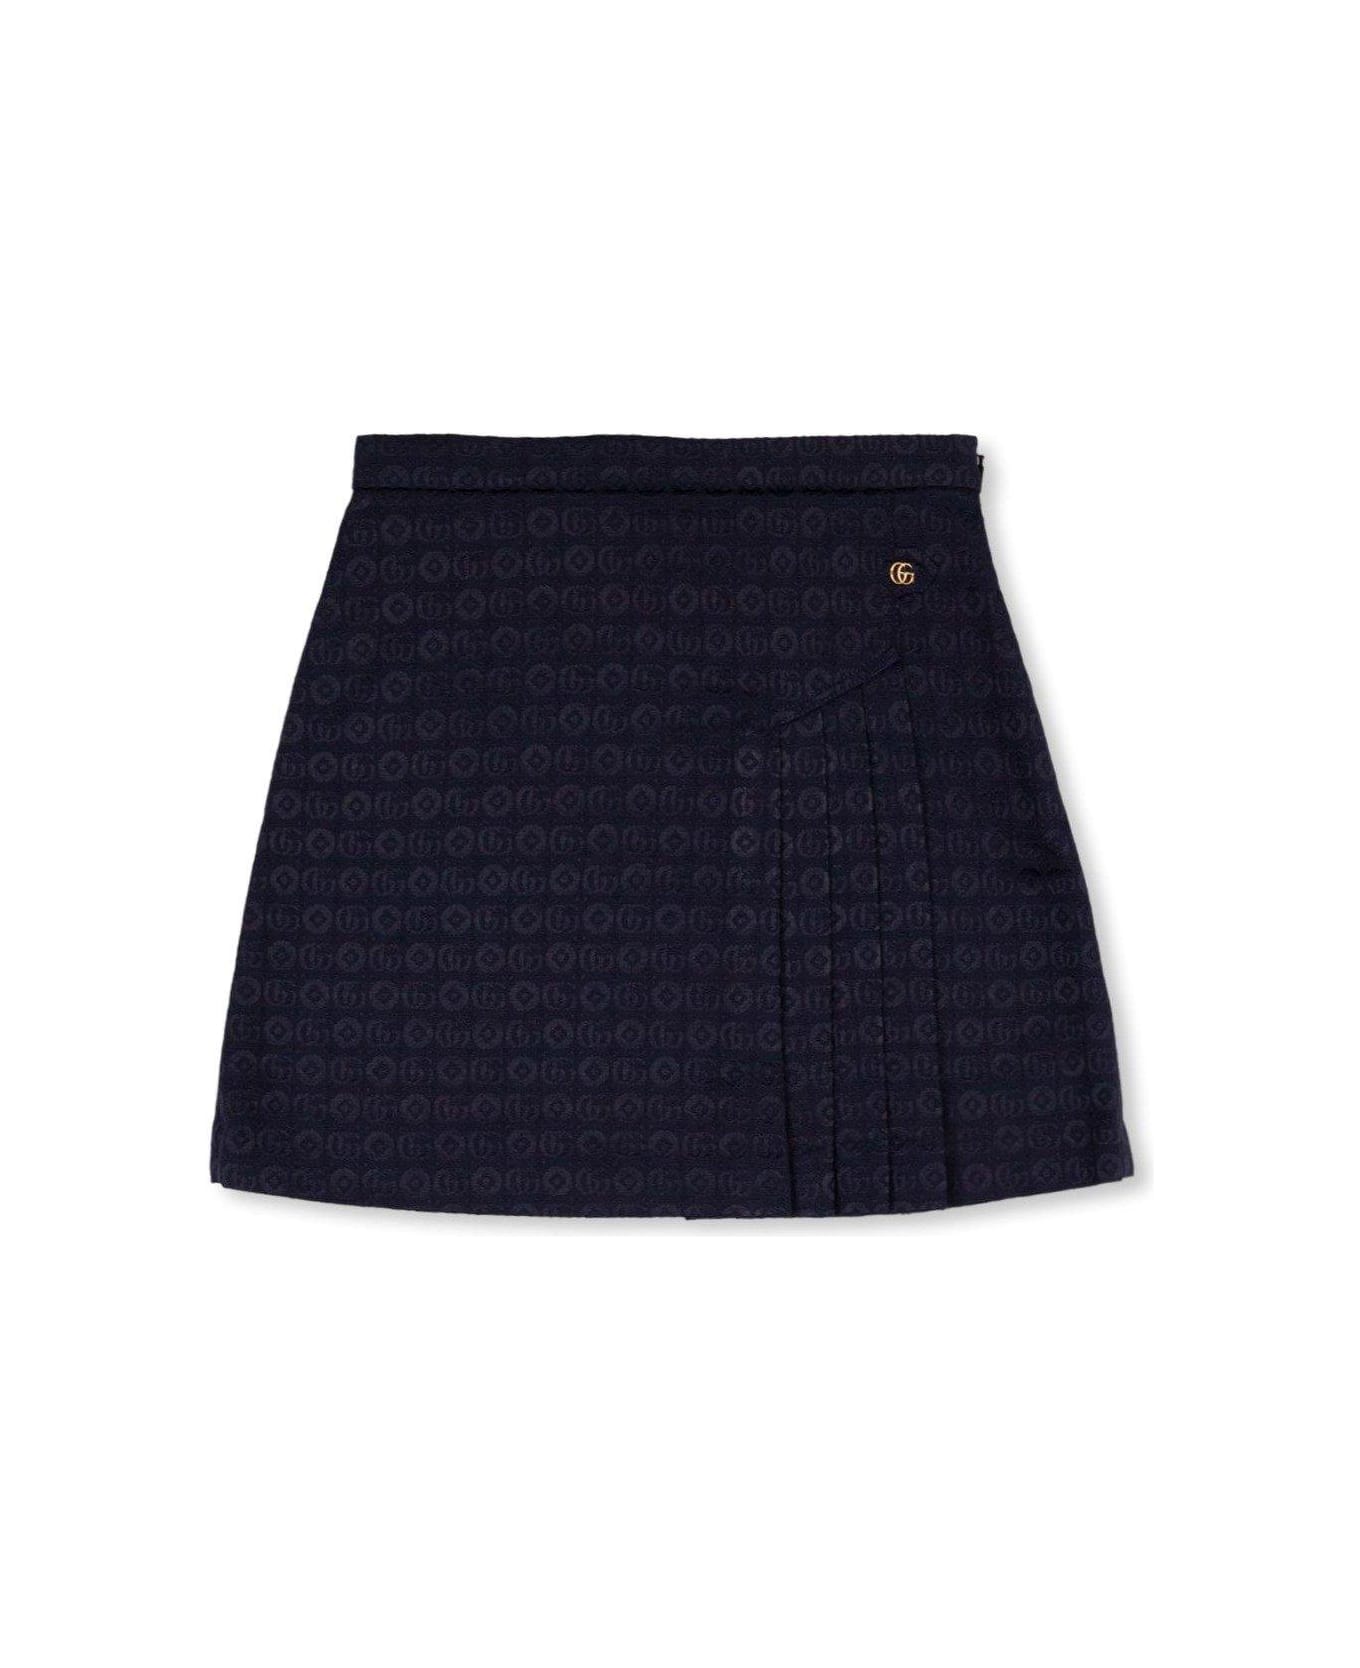 Gucci Logo Plaque Pleated Skirt ボトムス